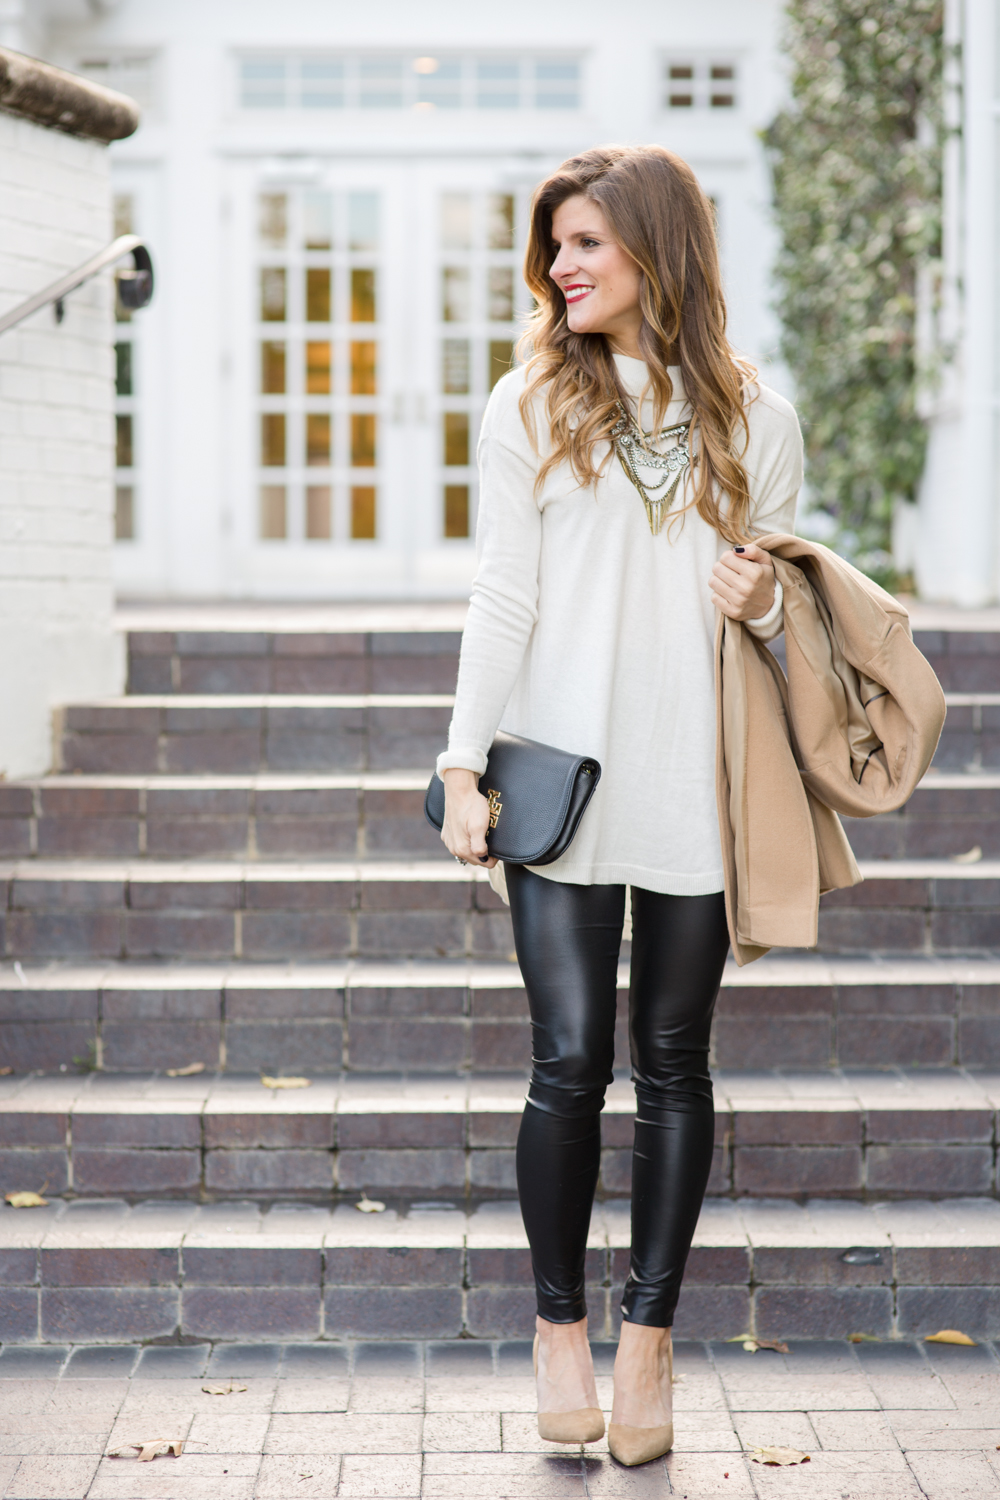 Leggings Outfits: Inspiration for Fall and Winter - Wishes & Reality   Outfits with leggings, Leather leggings outfit night, Faux leather leggings  outfit